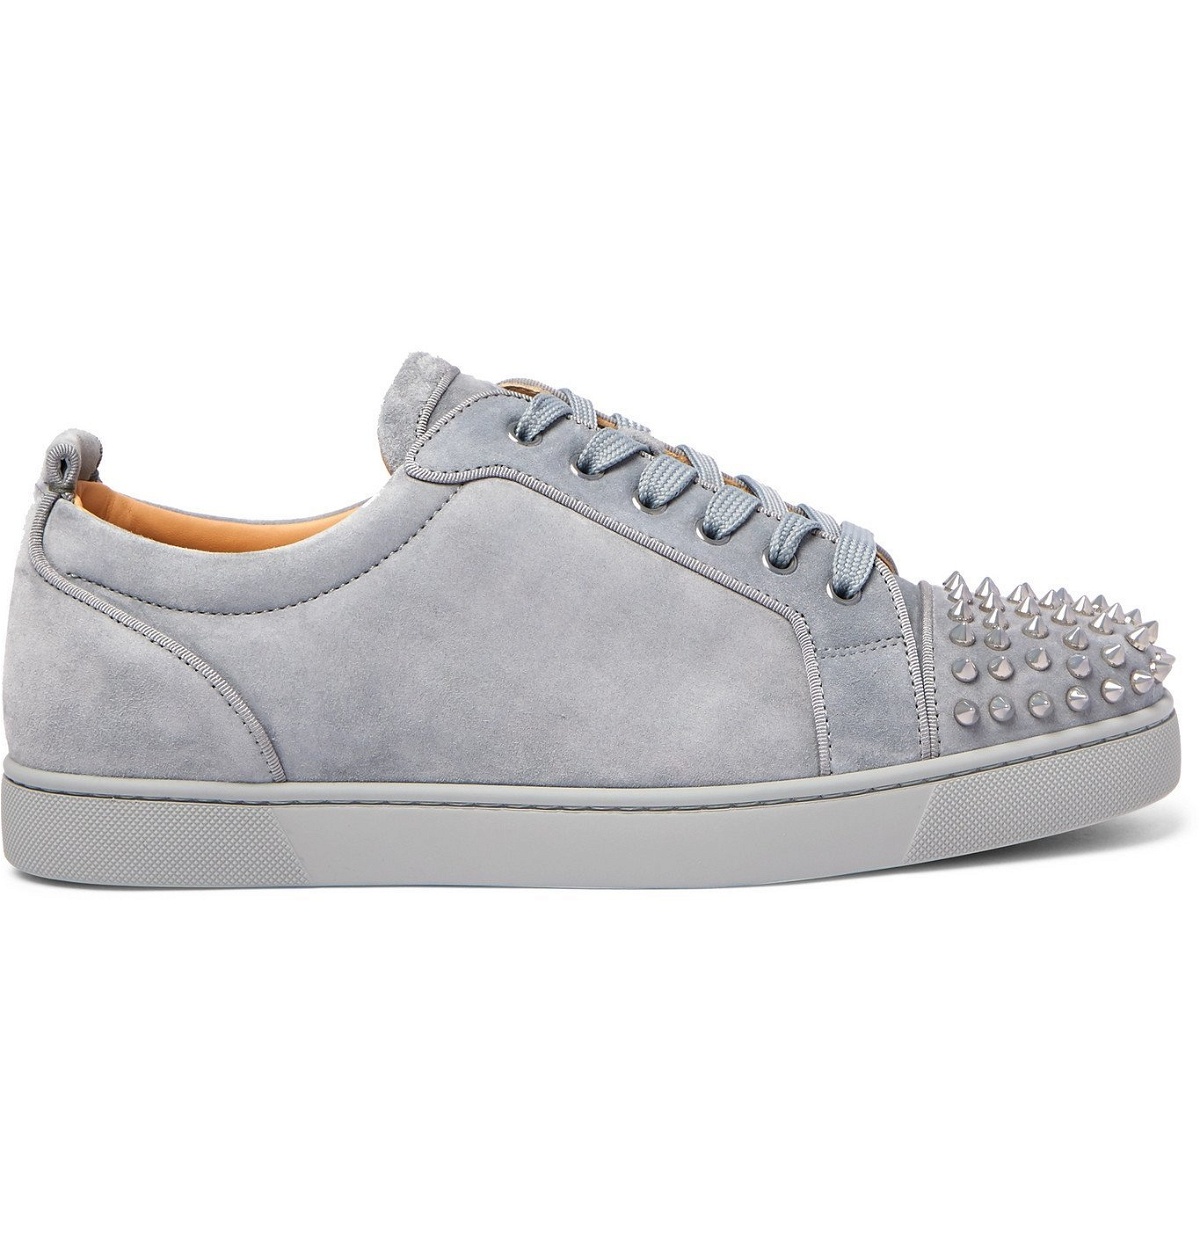 Christian Louboutin Grey Leather and Suede Louis Junior Spike Low